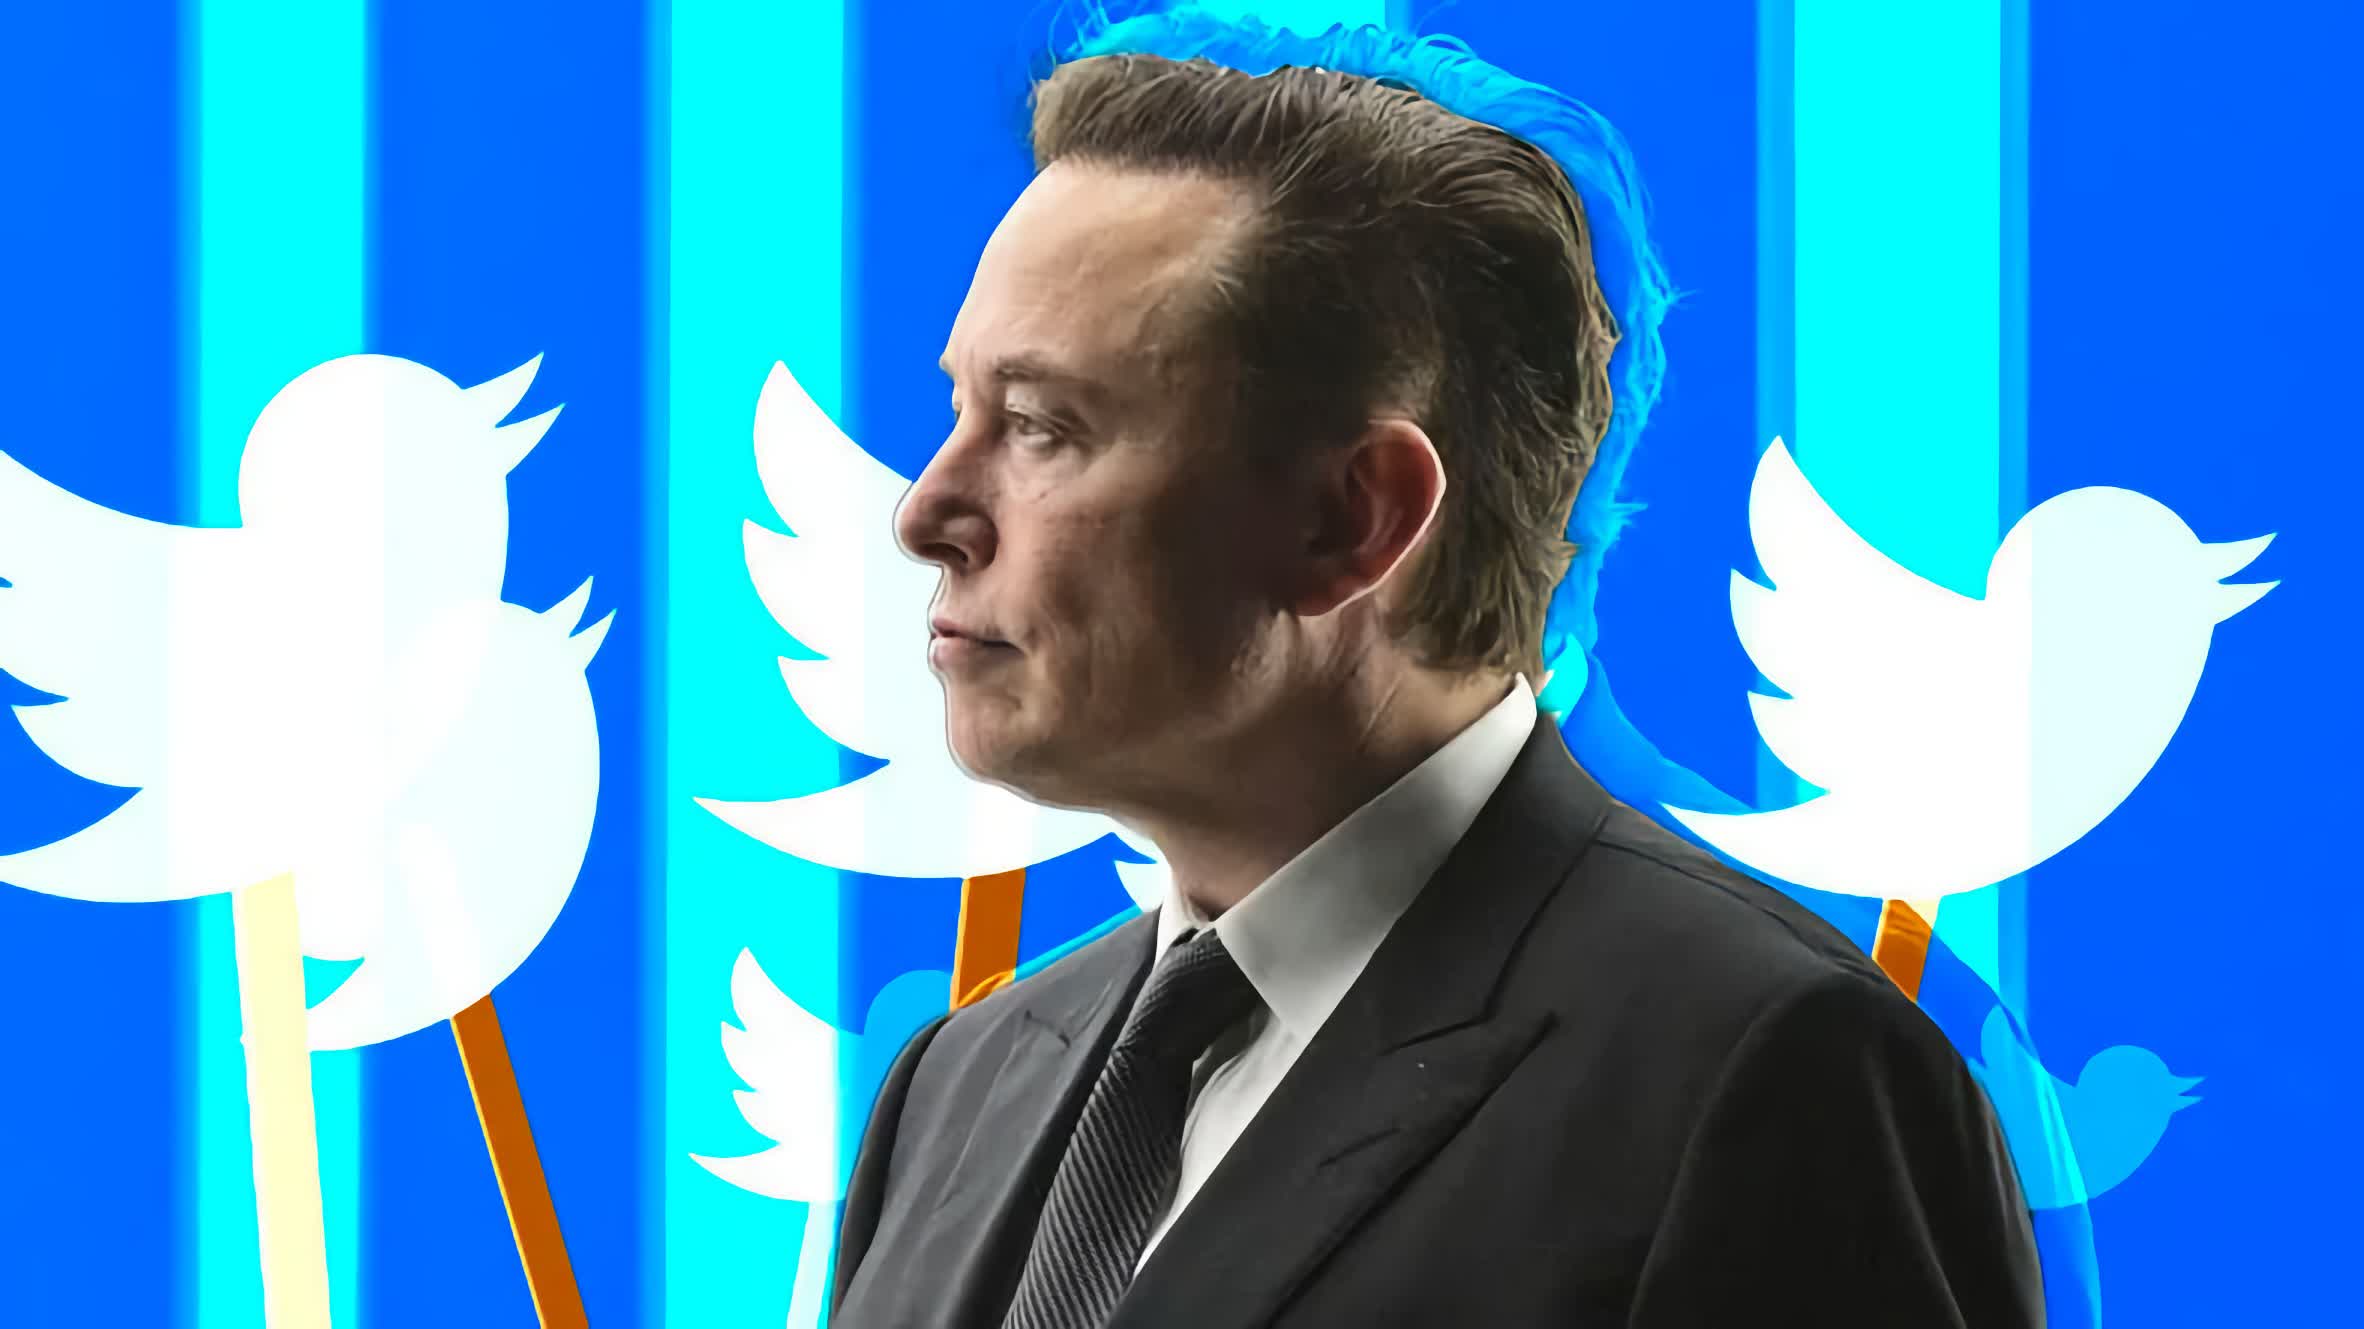 Elon Musk says Twitter deal on hold as spam account report is investigated